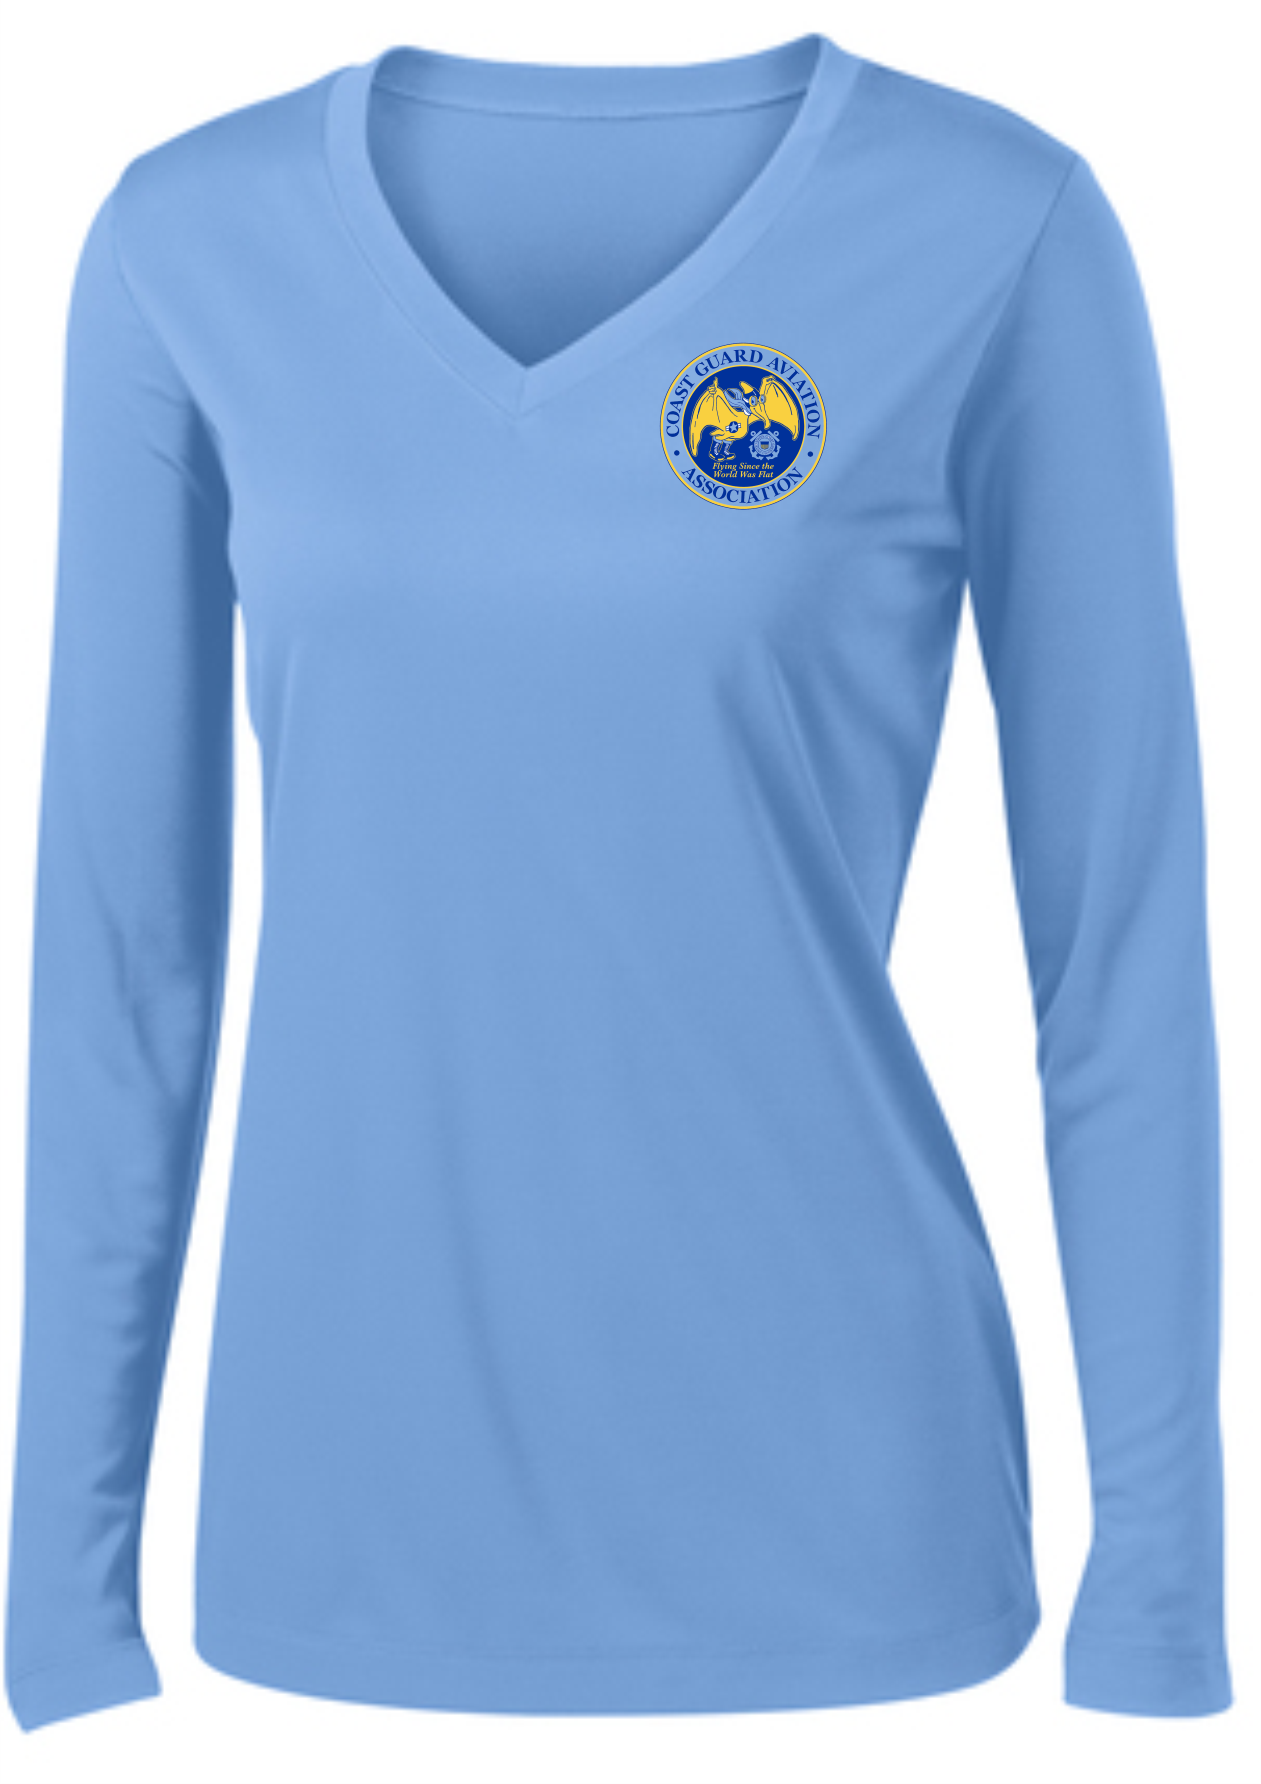 Ladies Search and Rescue Long Sleeve Tech Shirt